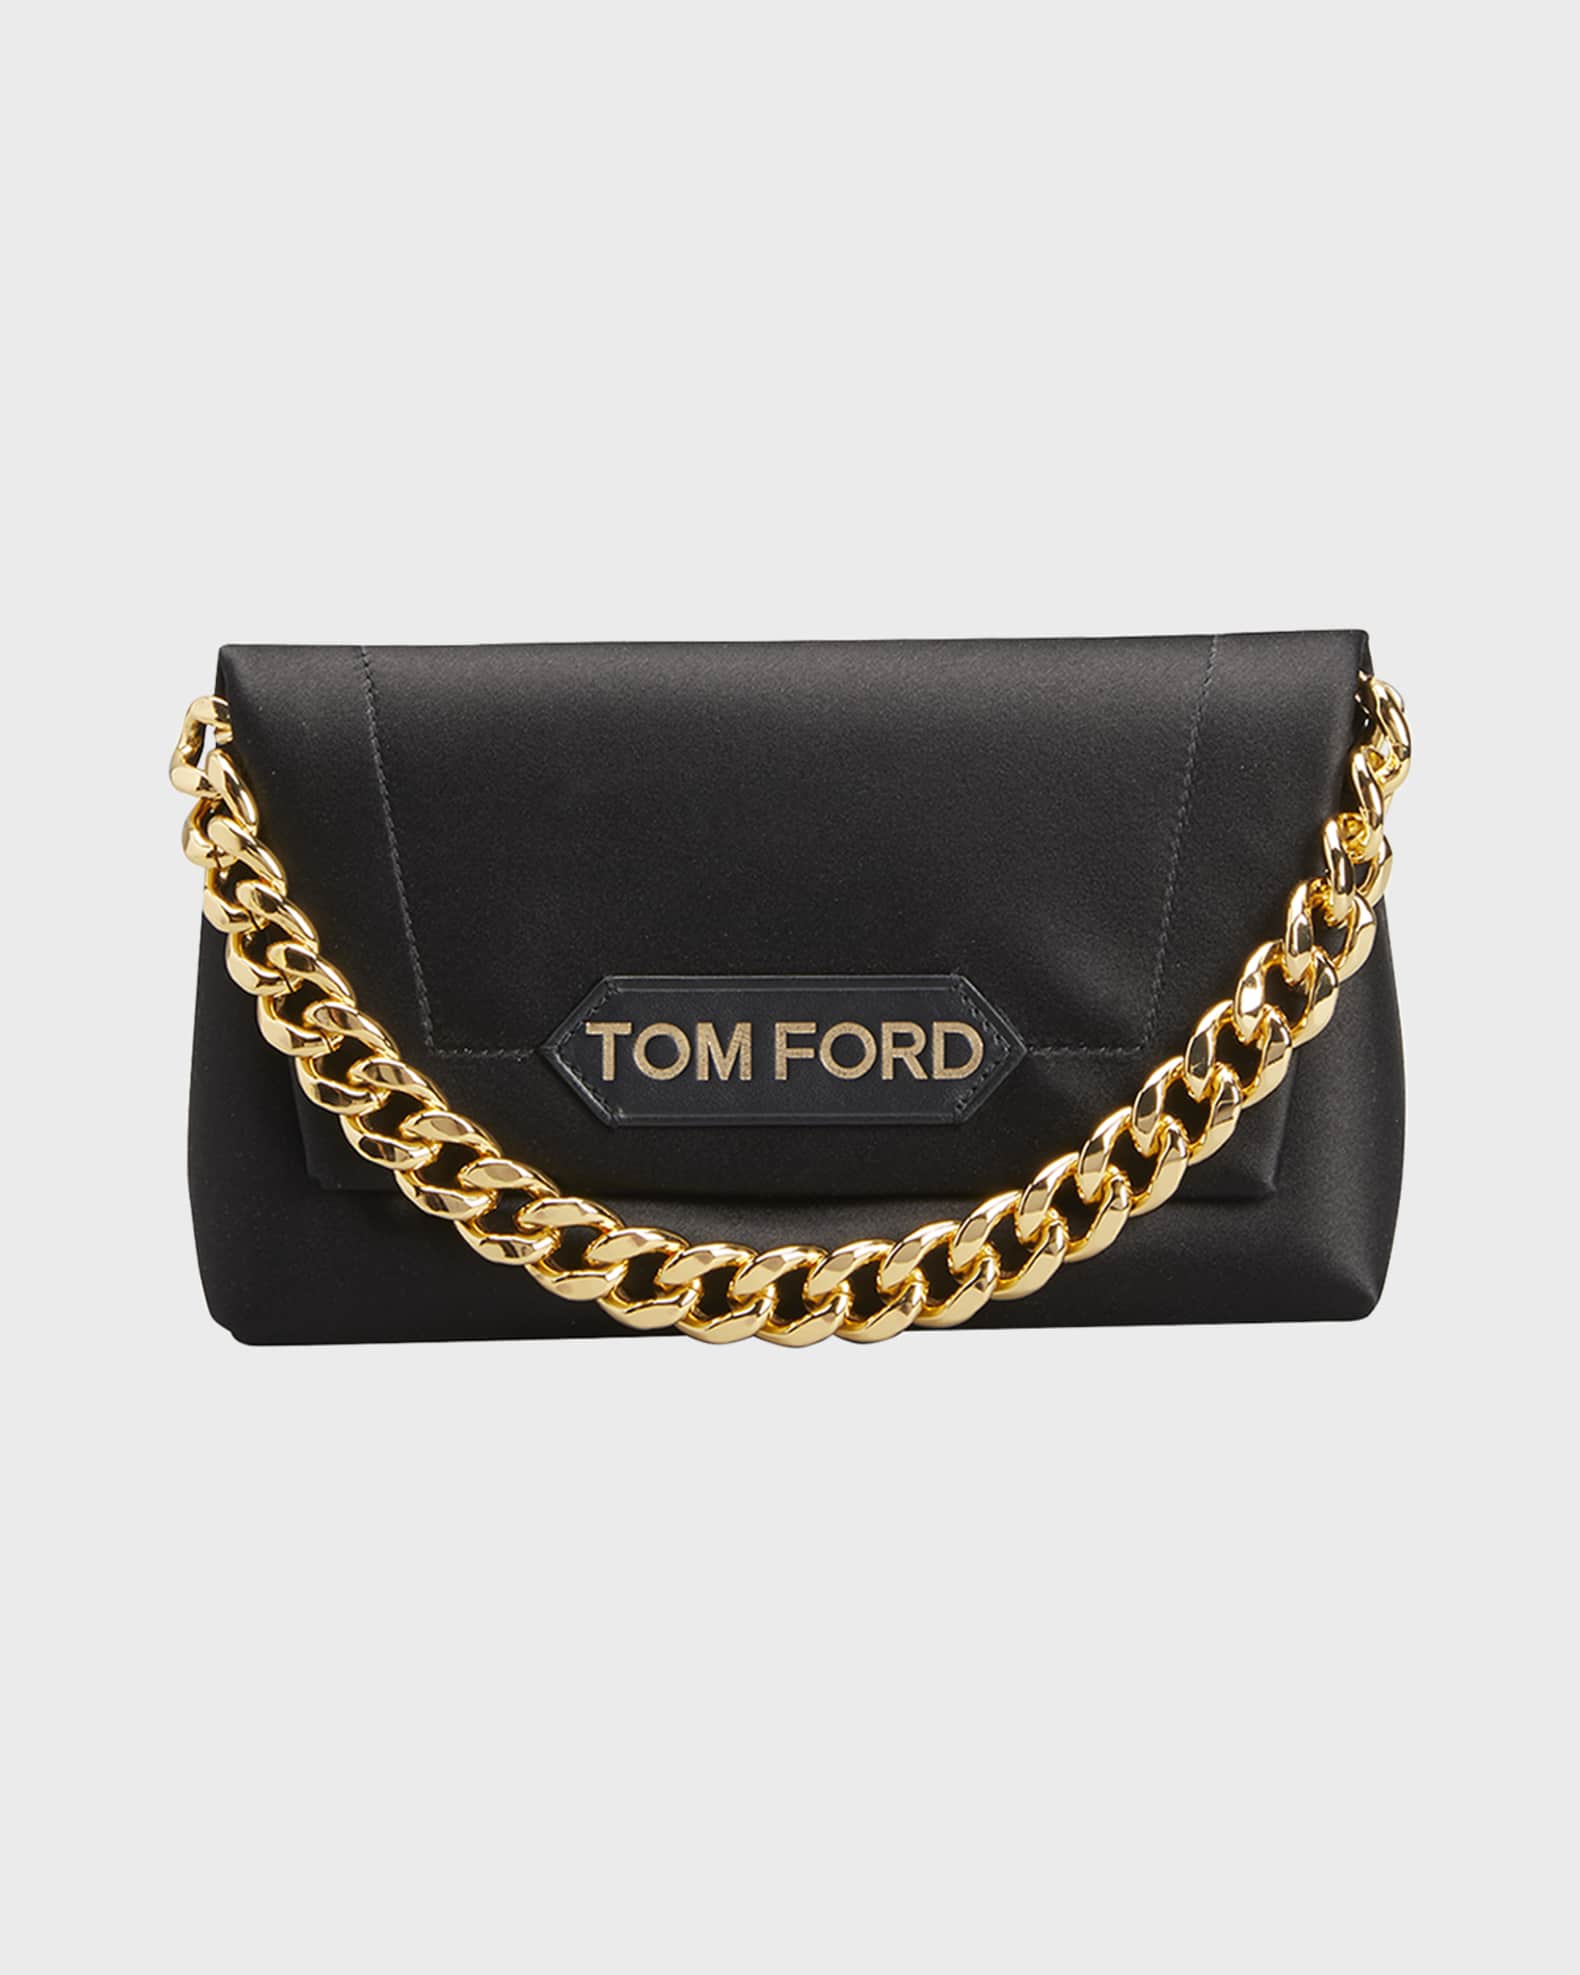 Tom Ford Phone Technology Envelope Leather Logo Pouch Case Wallet Bag